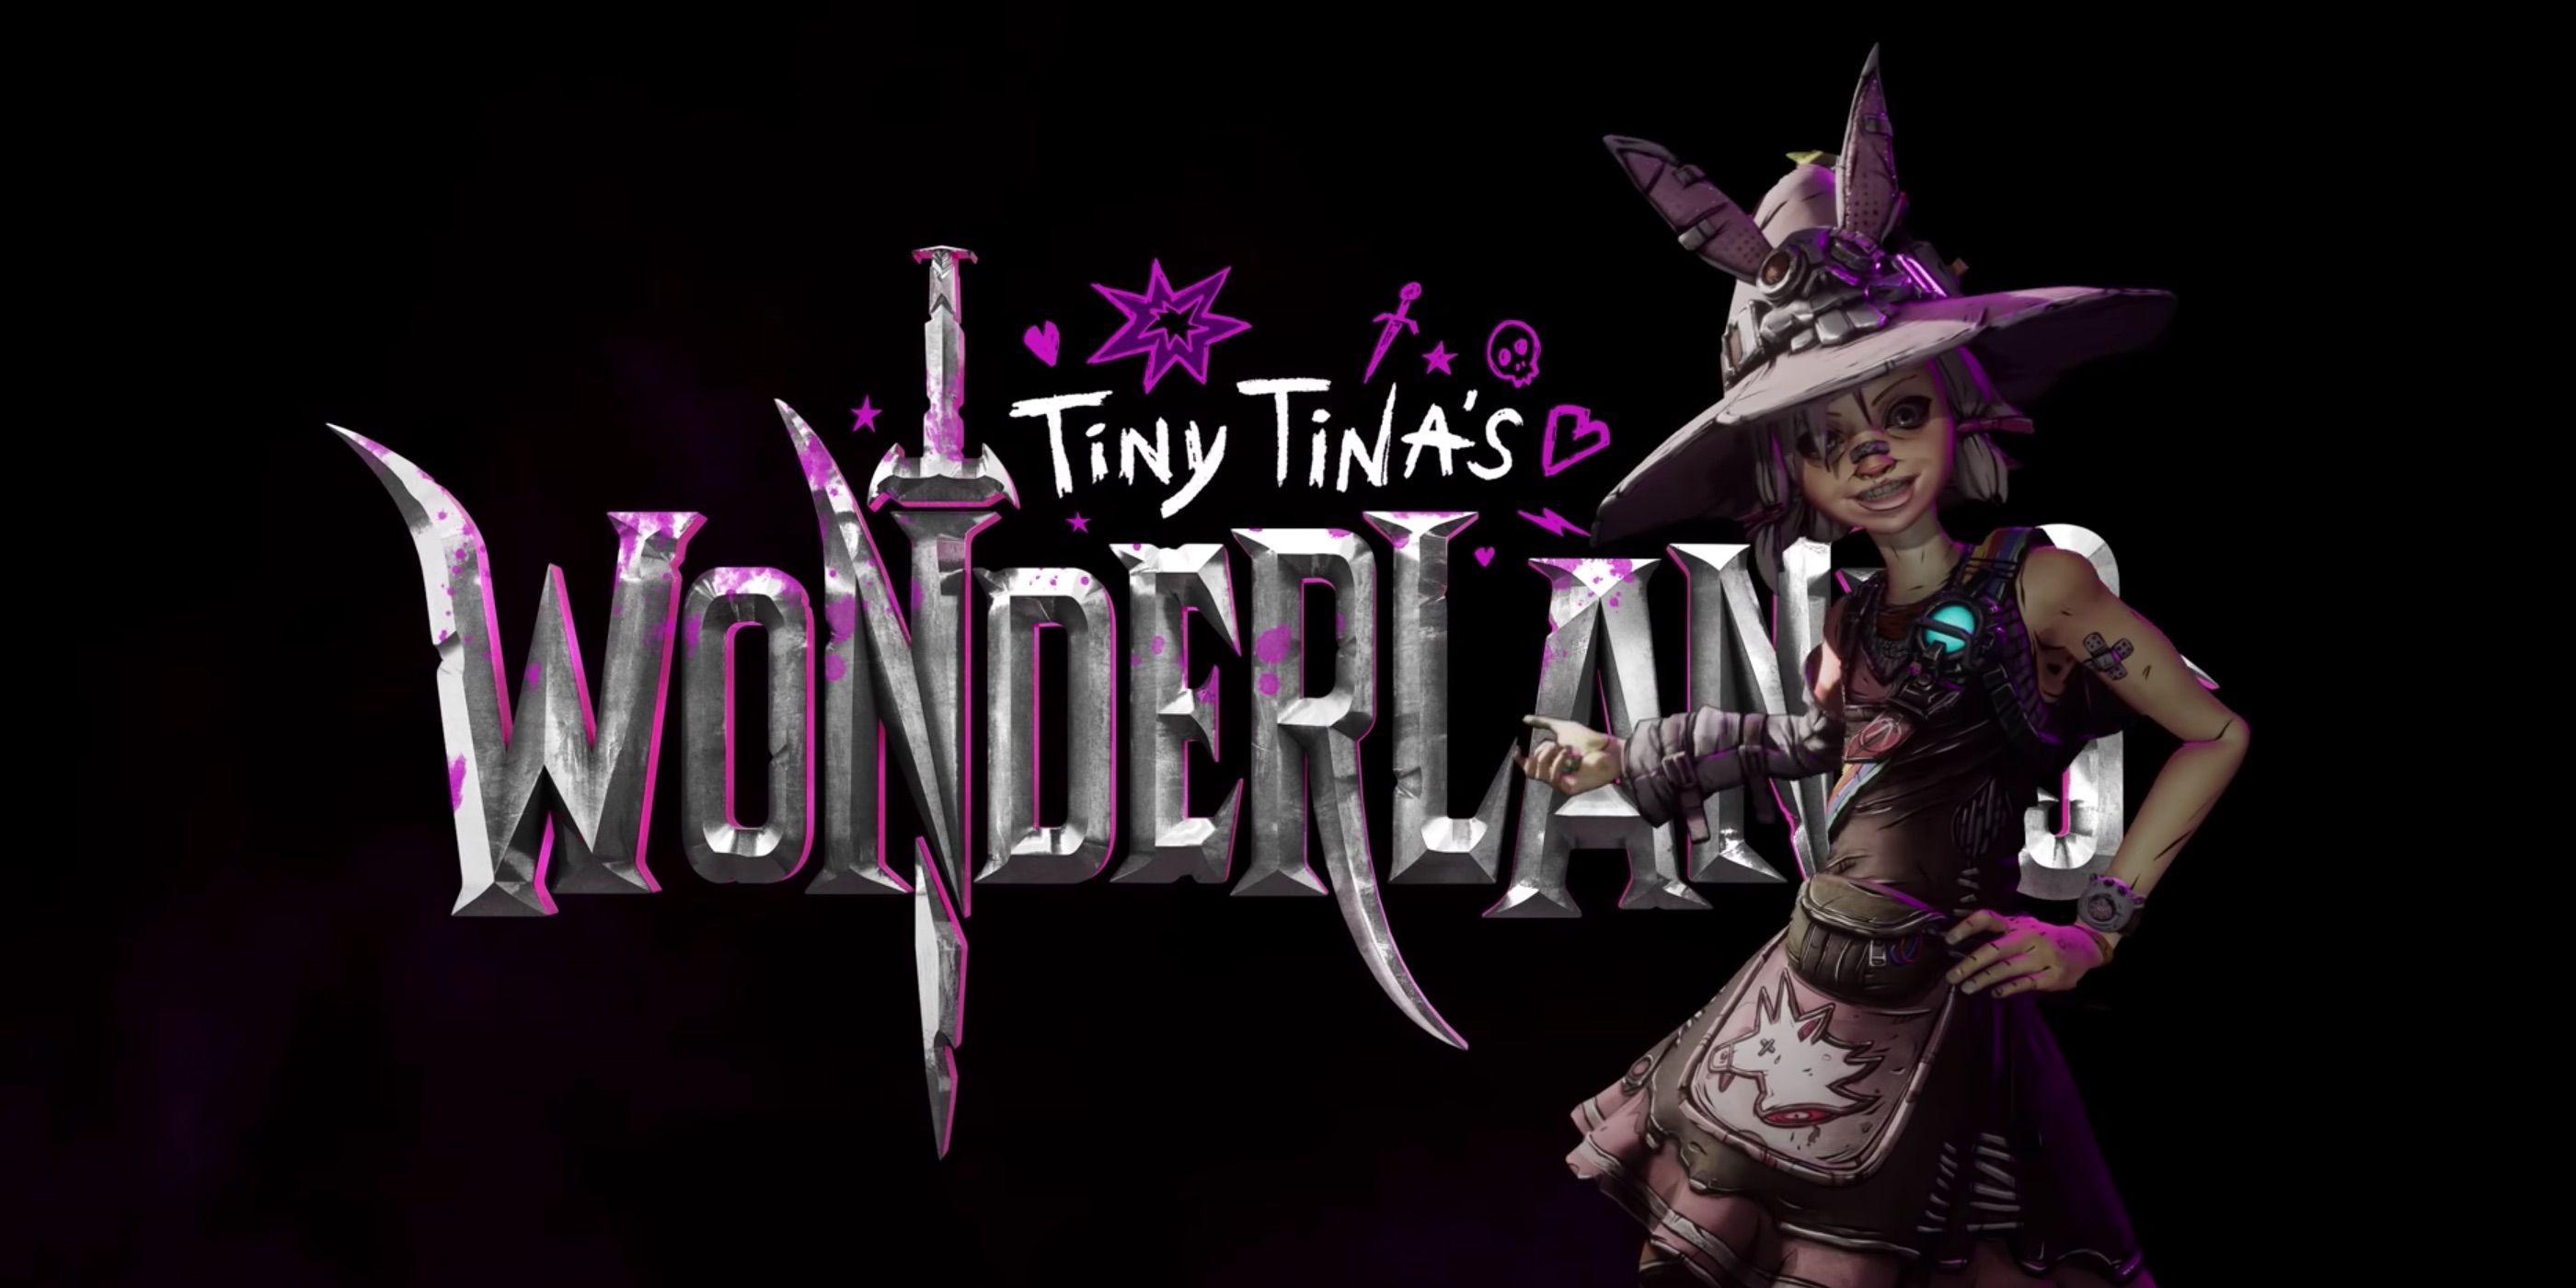 Tiny Tinas Wonderlands Release Date Teased In First Trailer For